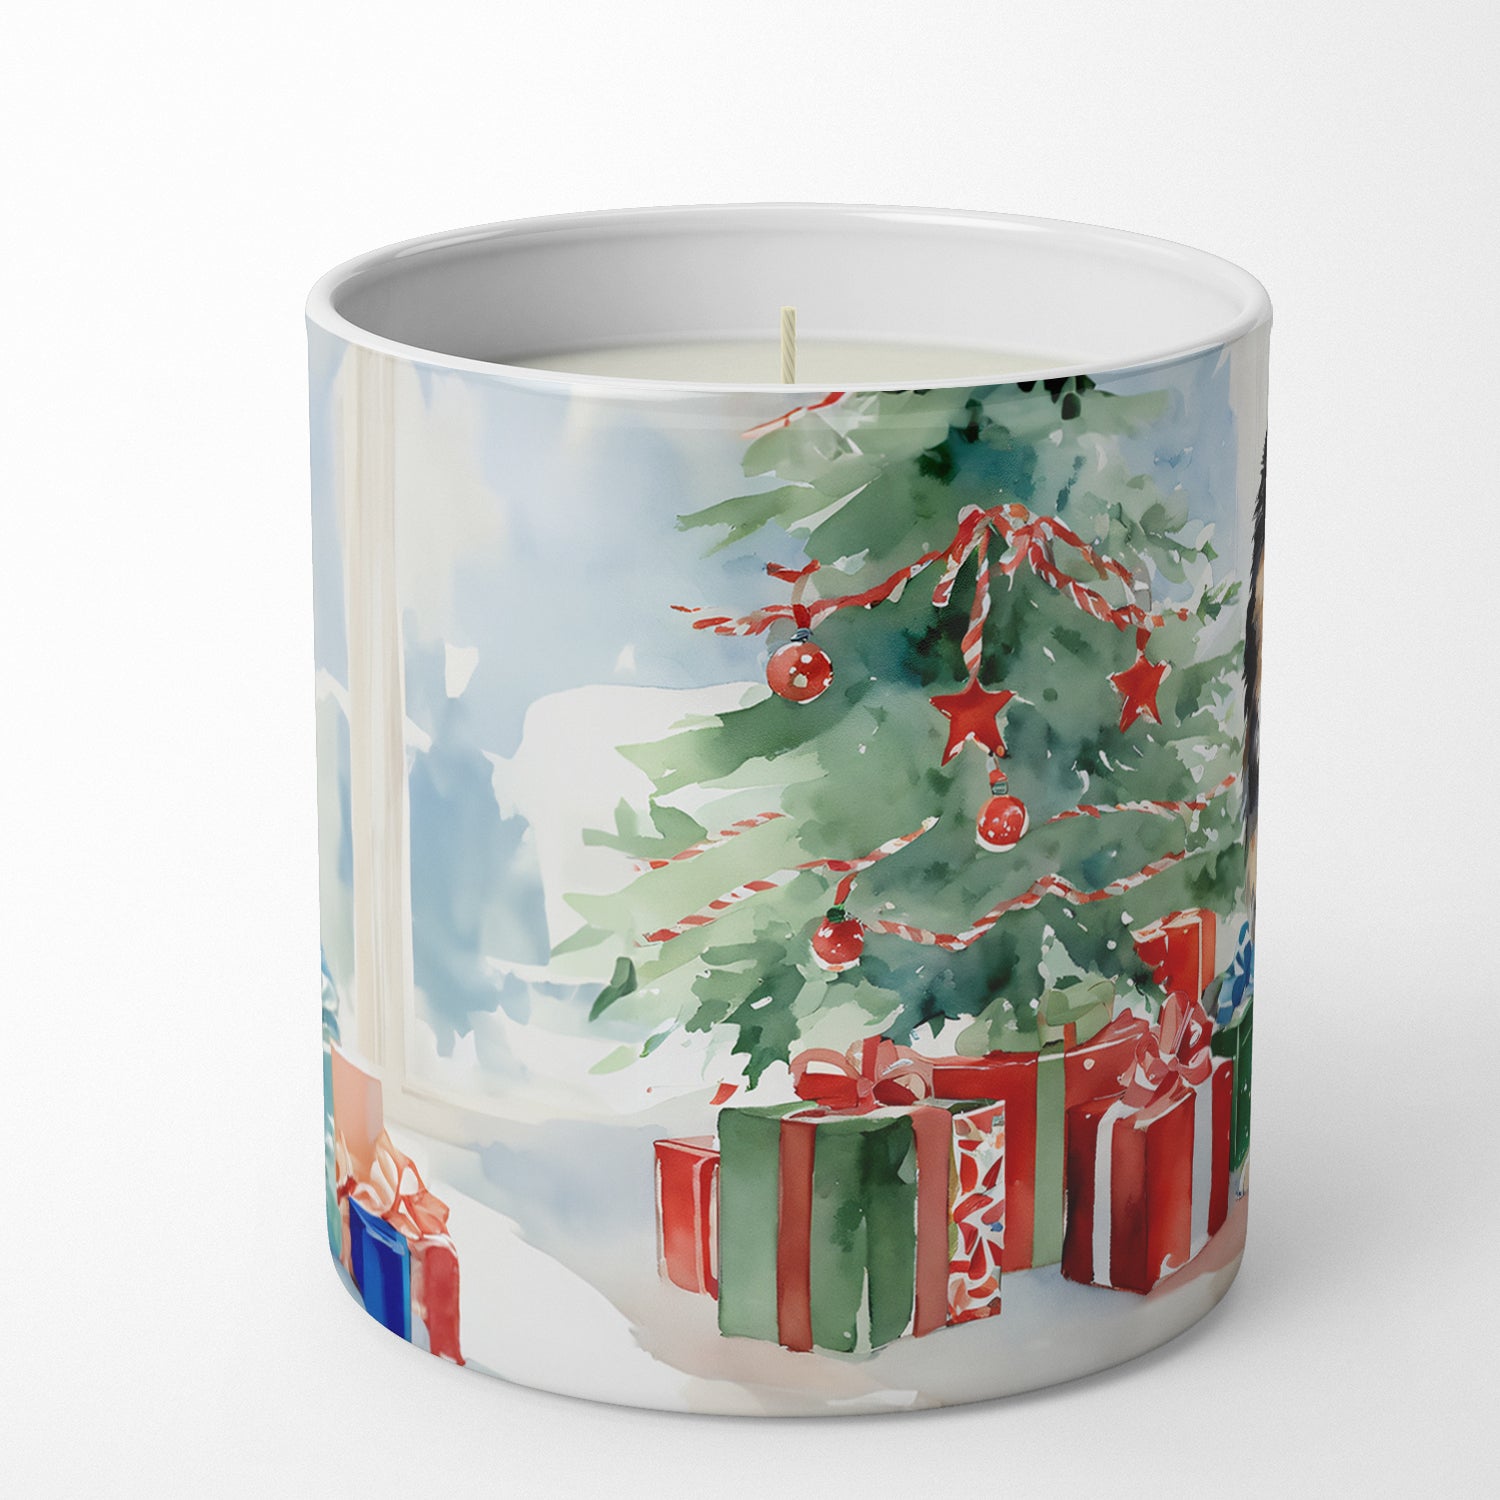 Finnish Lapphund Cozy Christmas Decorative Soy Candle